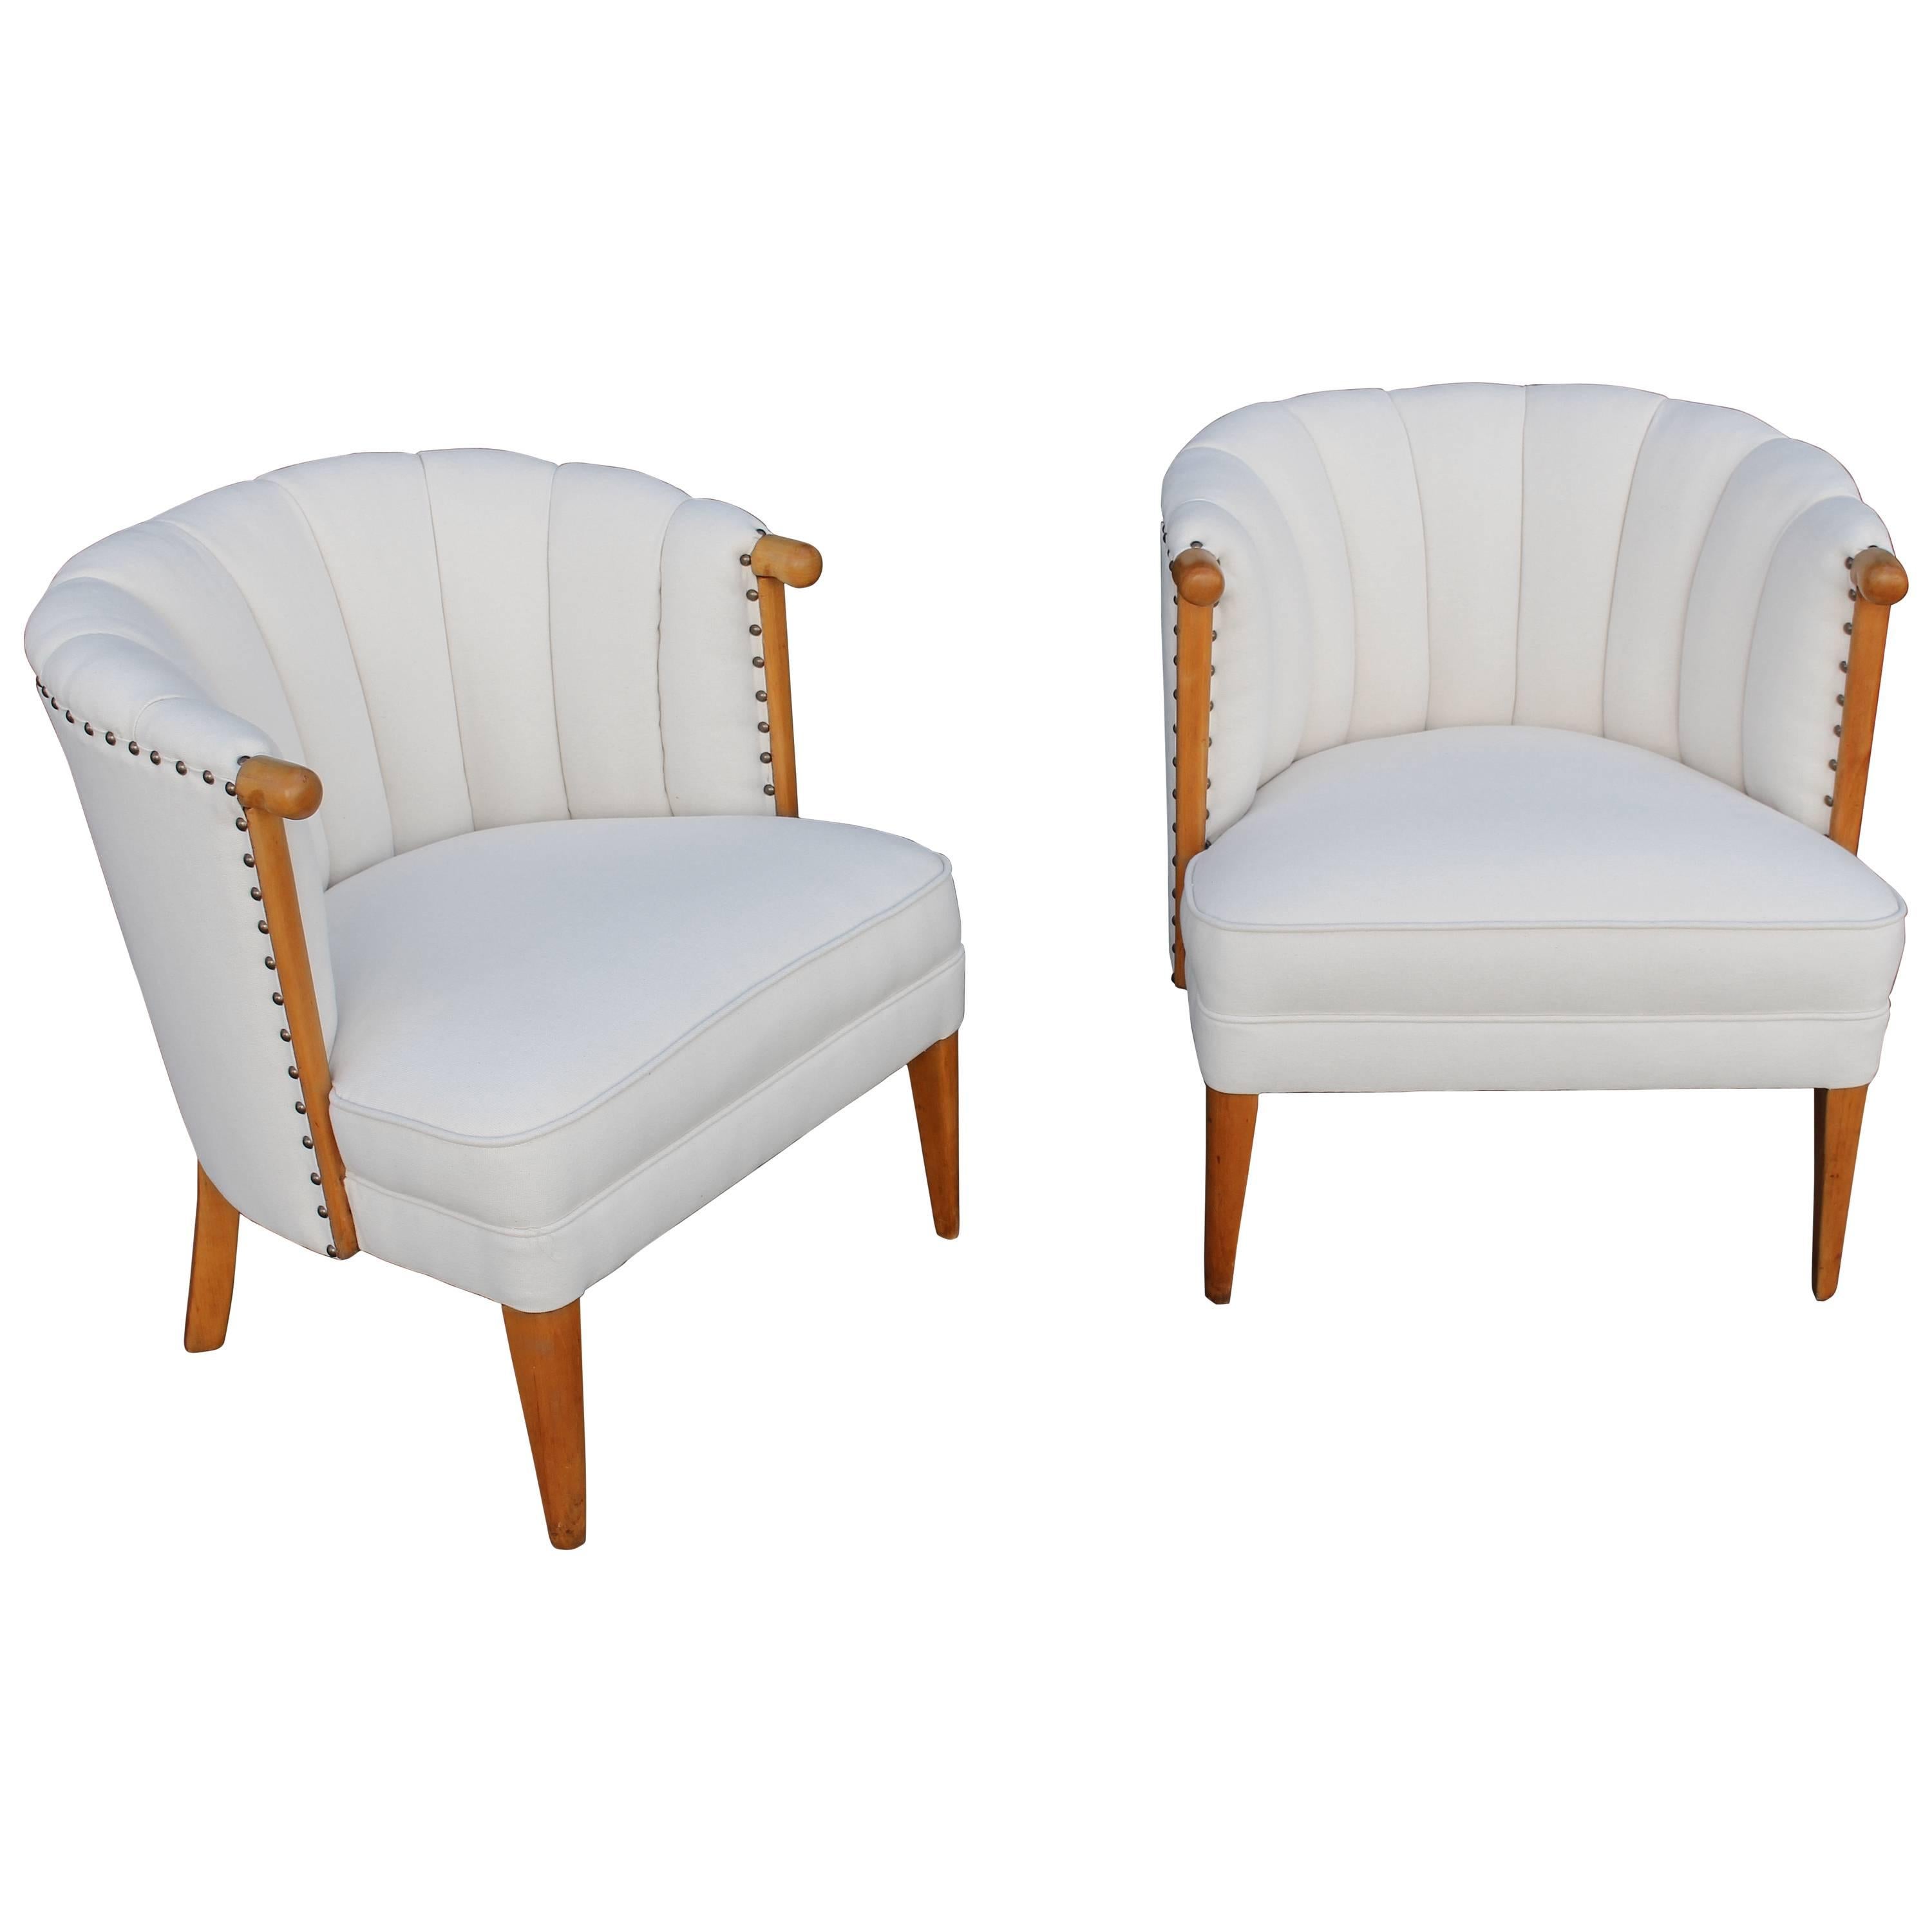 Hollywood Regency Channel Back Chairs